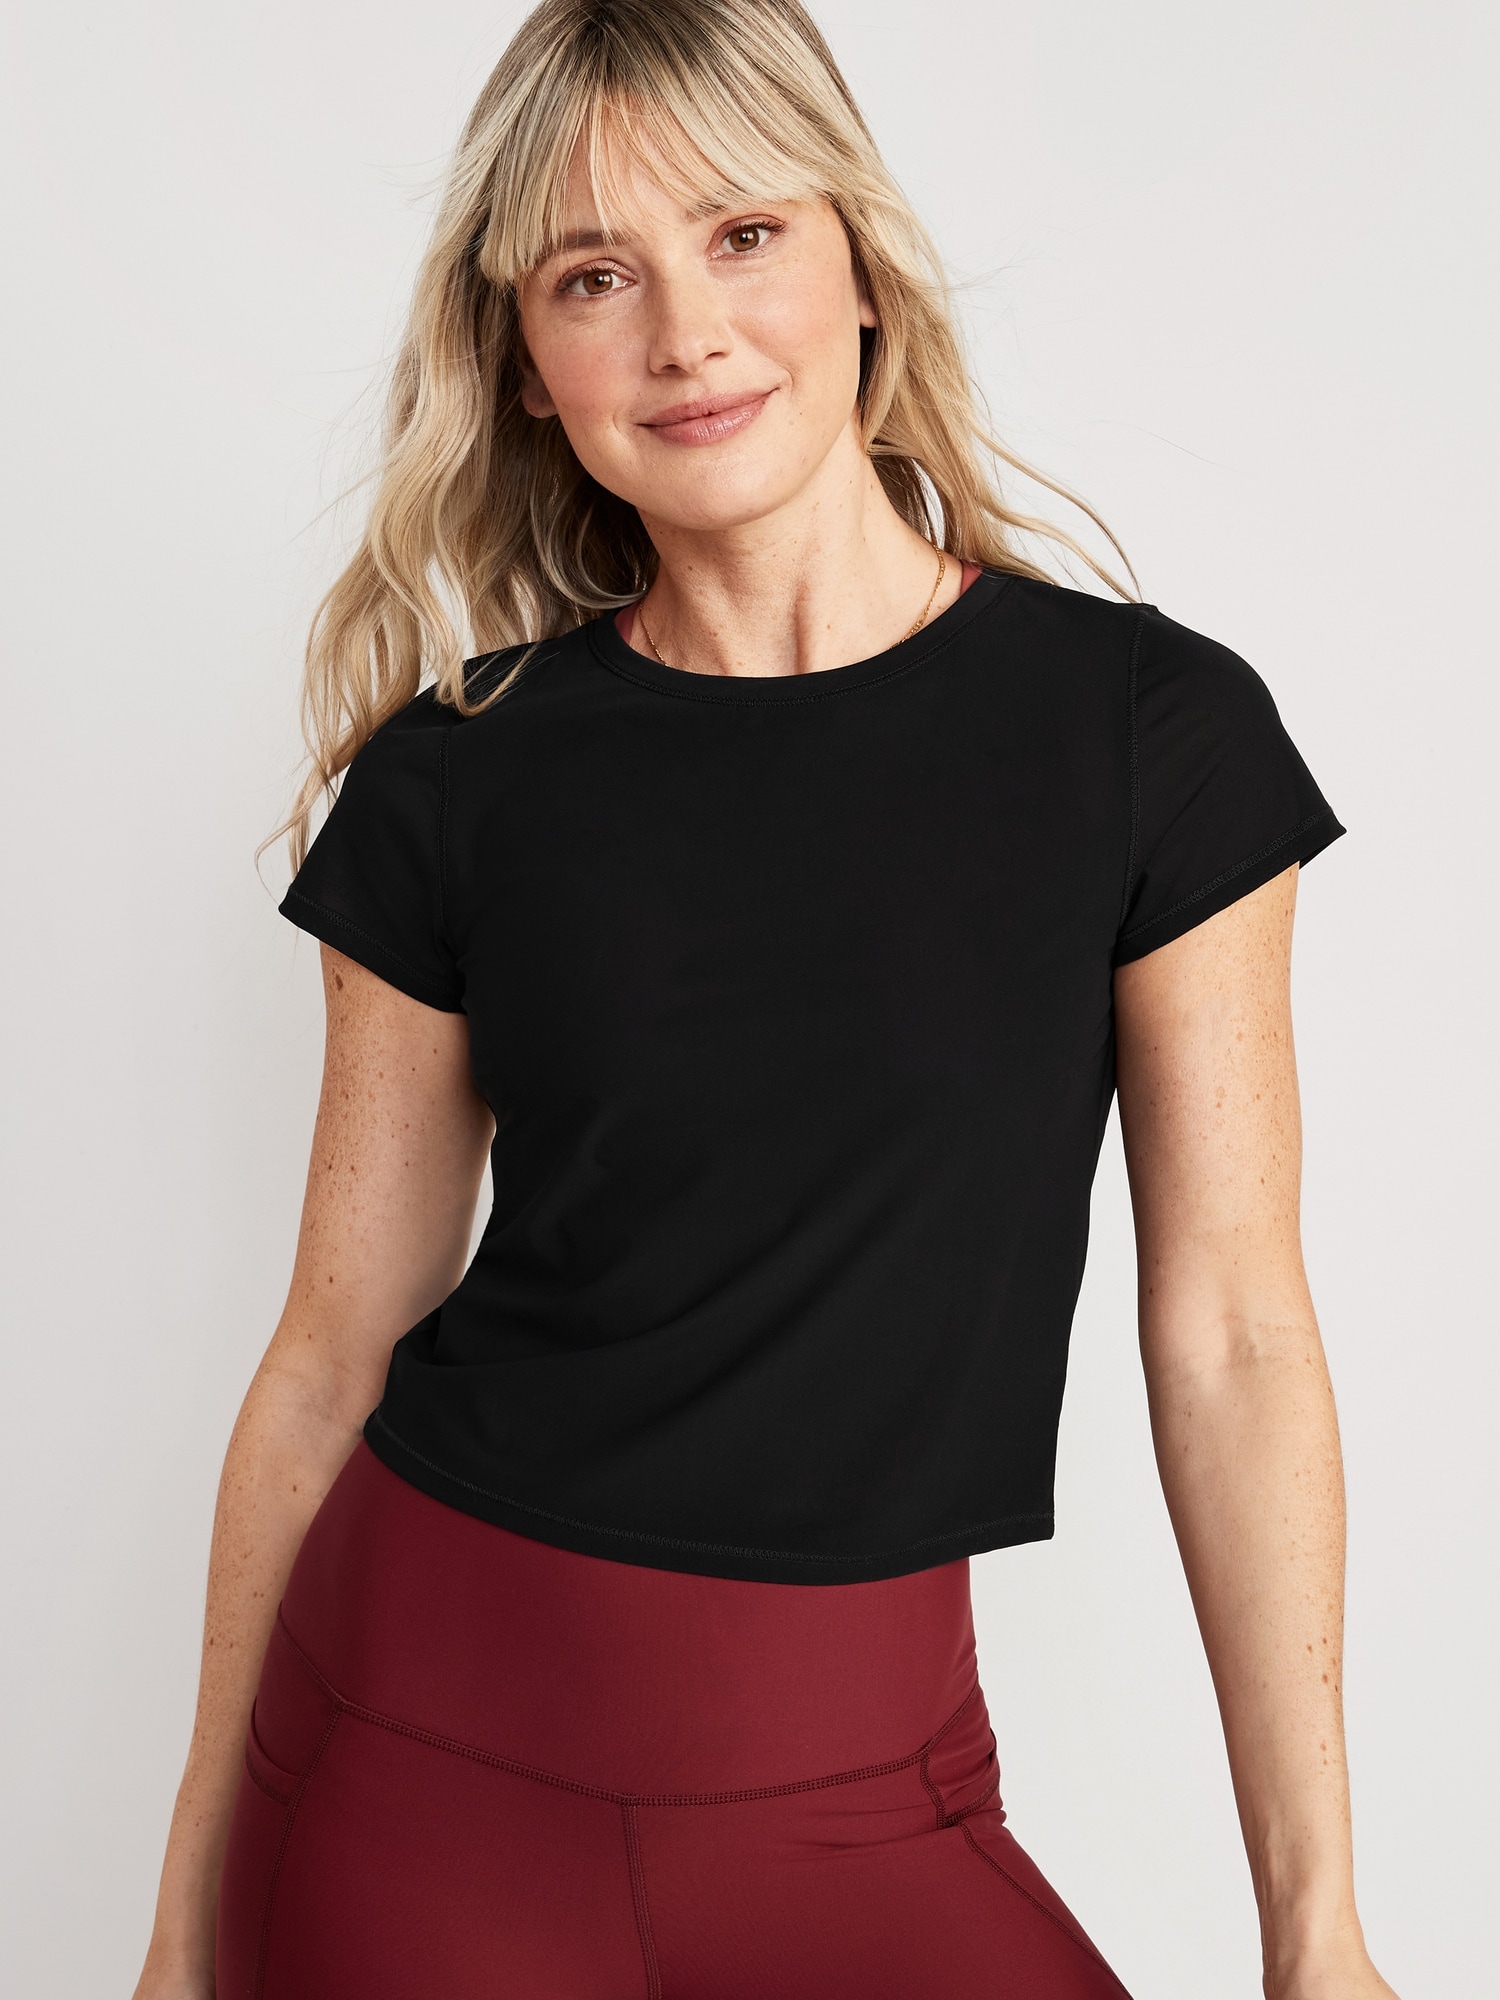 Old Navy PowerSoft Cropped T-Shirt for Women black. 1